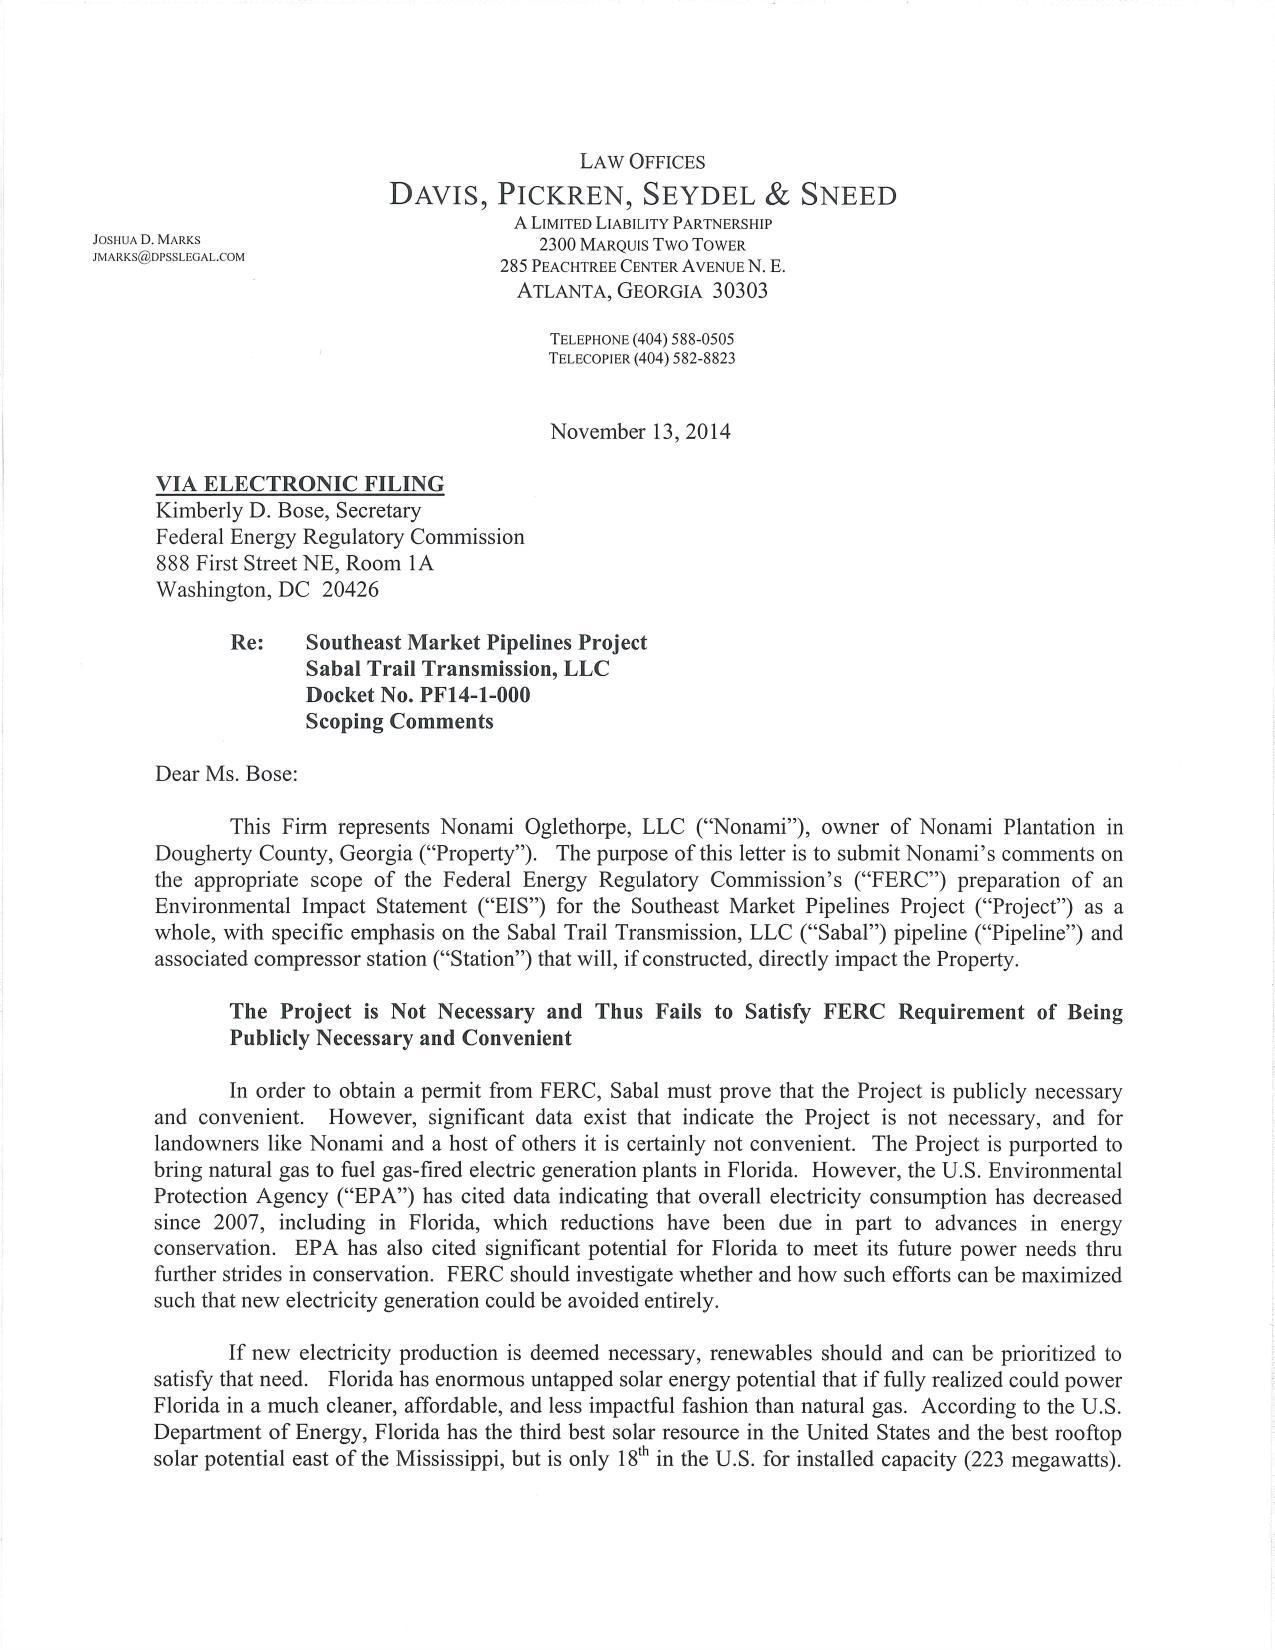 1275x1650 The Project is Not Necessary and Thus Fails to Satisfy FERC Requirement of Being Publicly Necessary and Convenient, in Nonami, by John S. Quarterman, for SpectraBusters.org, 13 November 2014